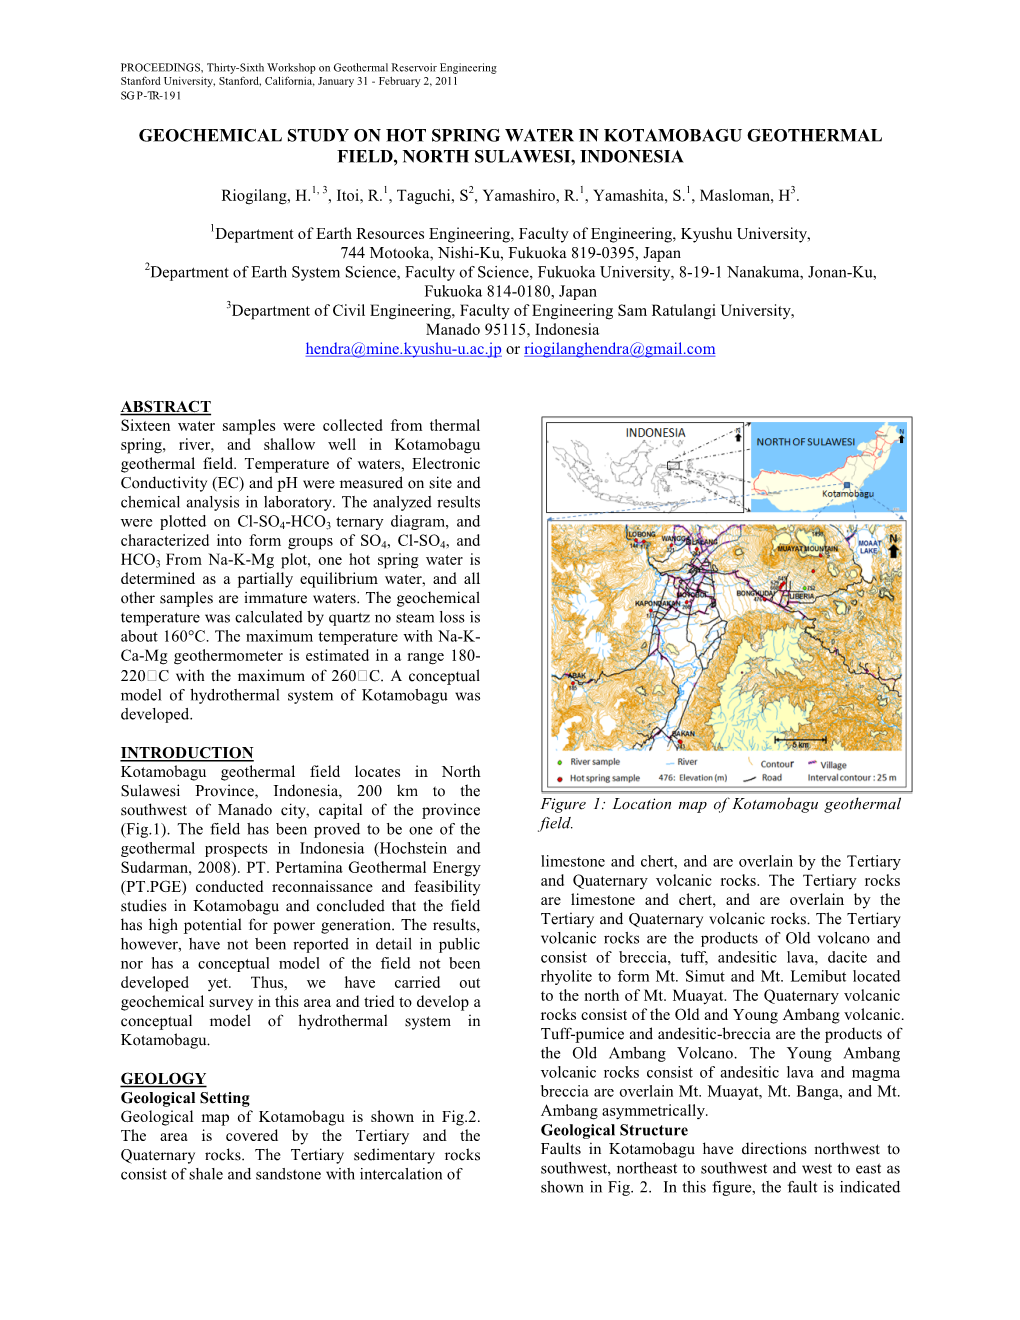 Hydrochemistry and Geothermometry at Kotamobagu Geothermal Field in North Sulawesi, Indonesia